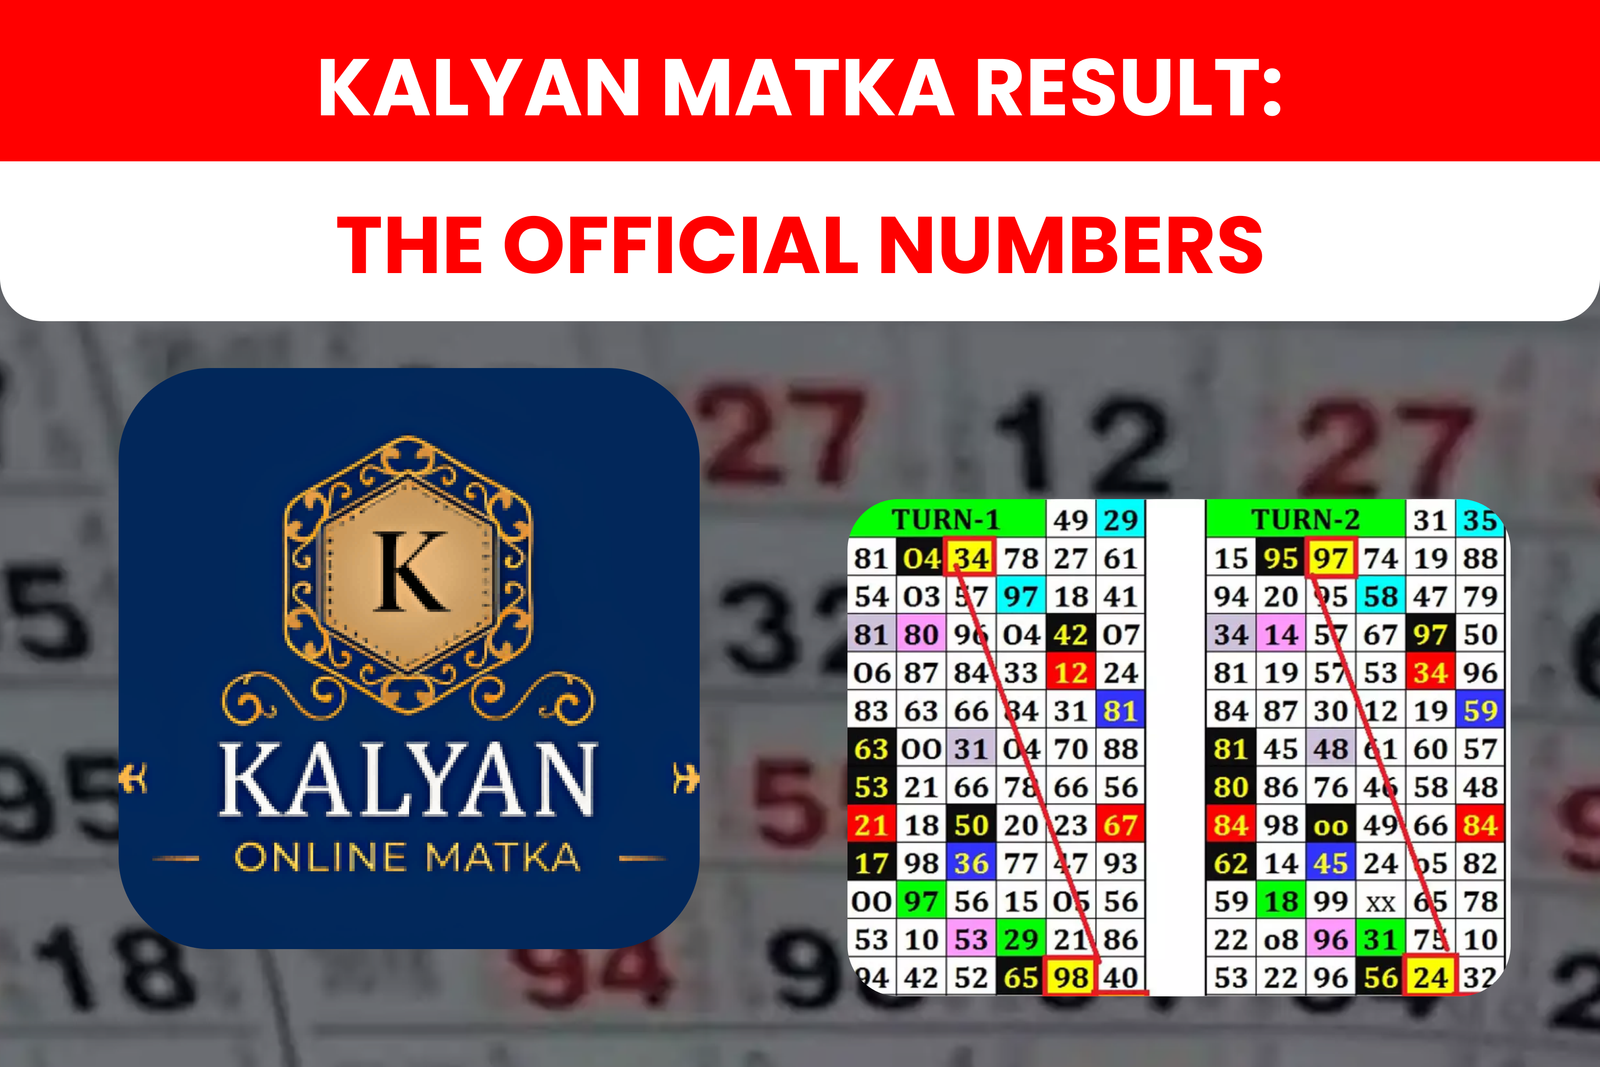 Kalyan Matka Result: The Official Numbers